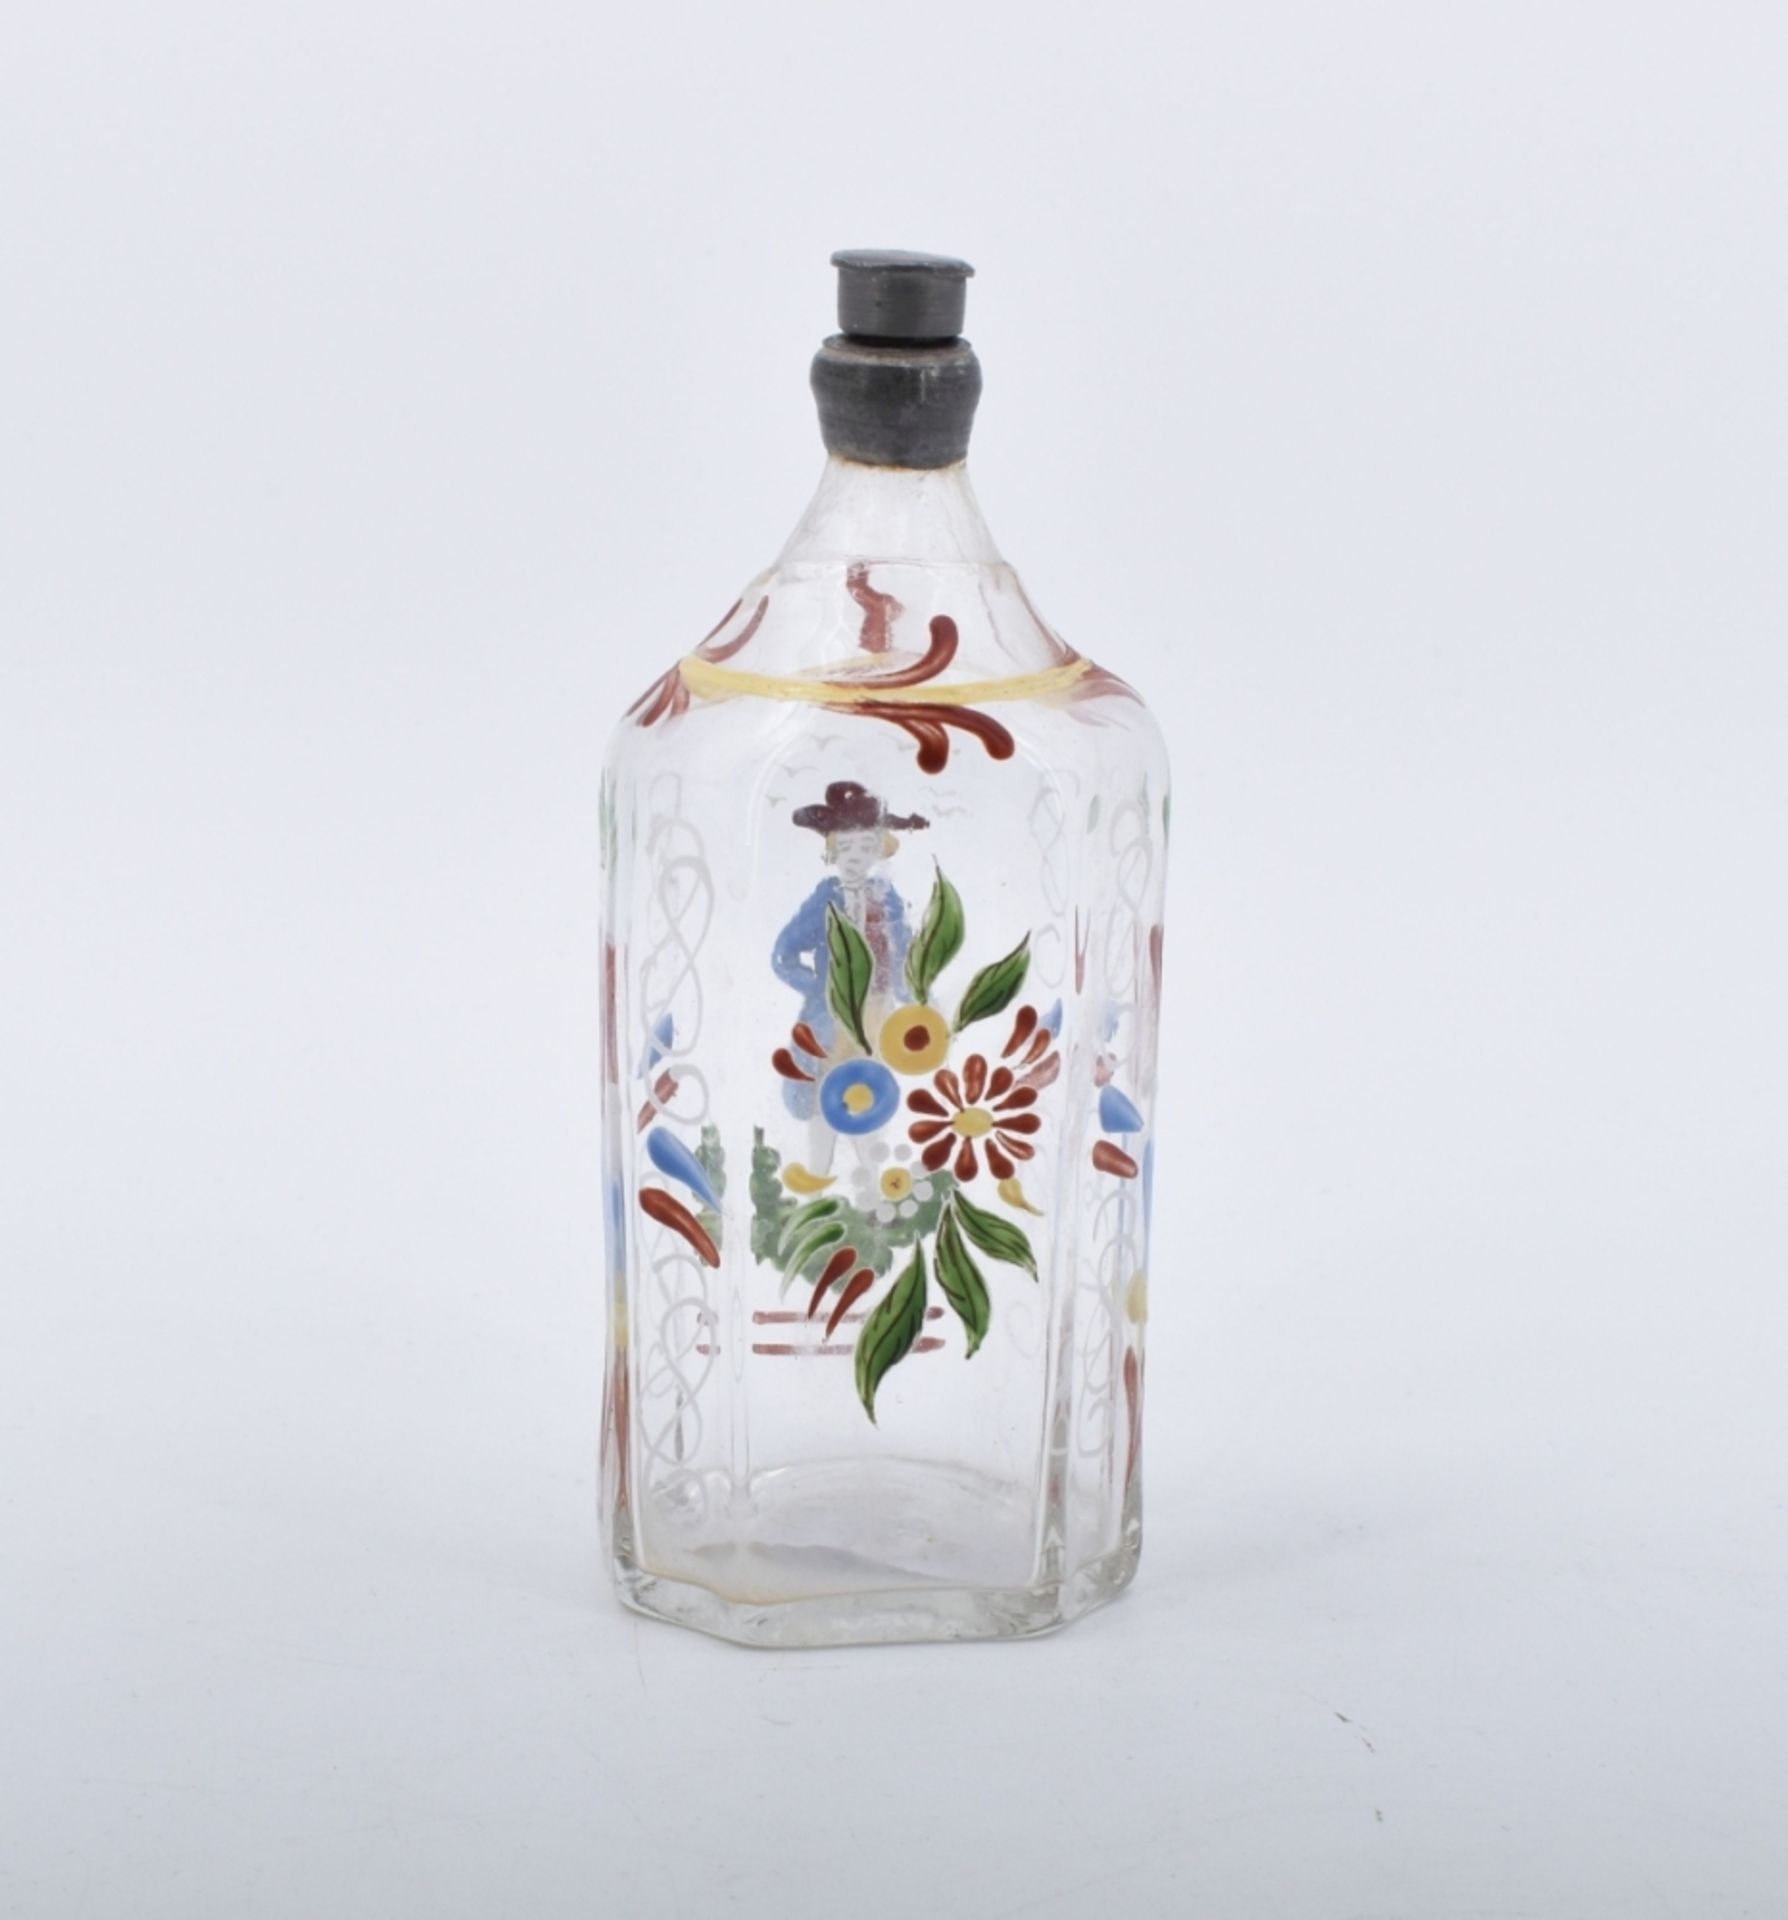 Schnapsflasche, 18. Jh. - Image 3 of 3